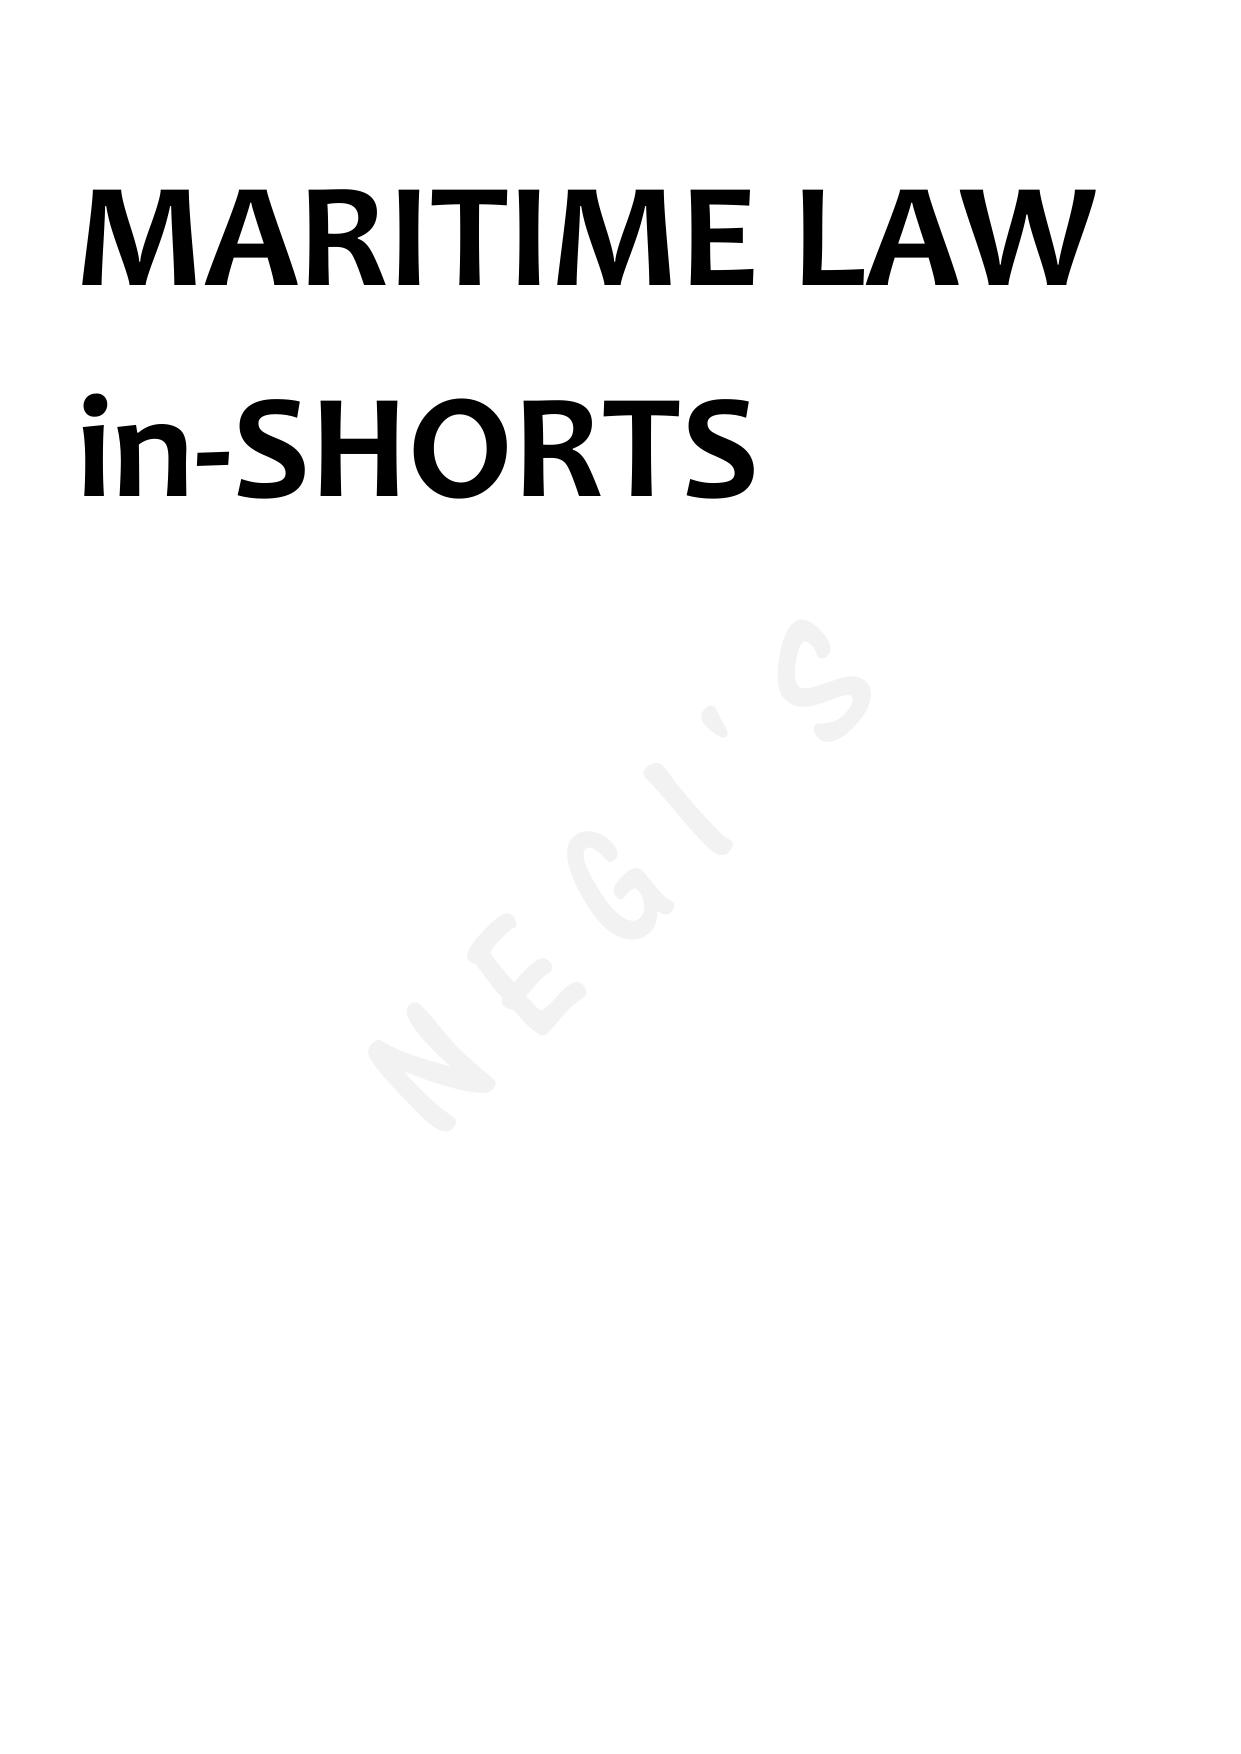 MARITIME LAW in by AMAN NEGI